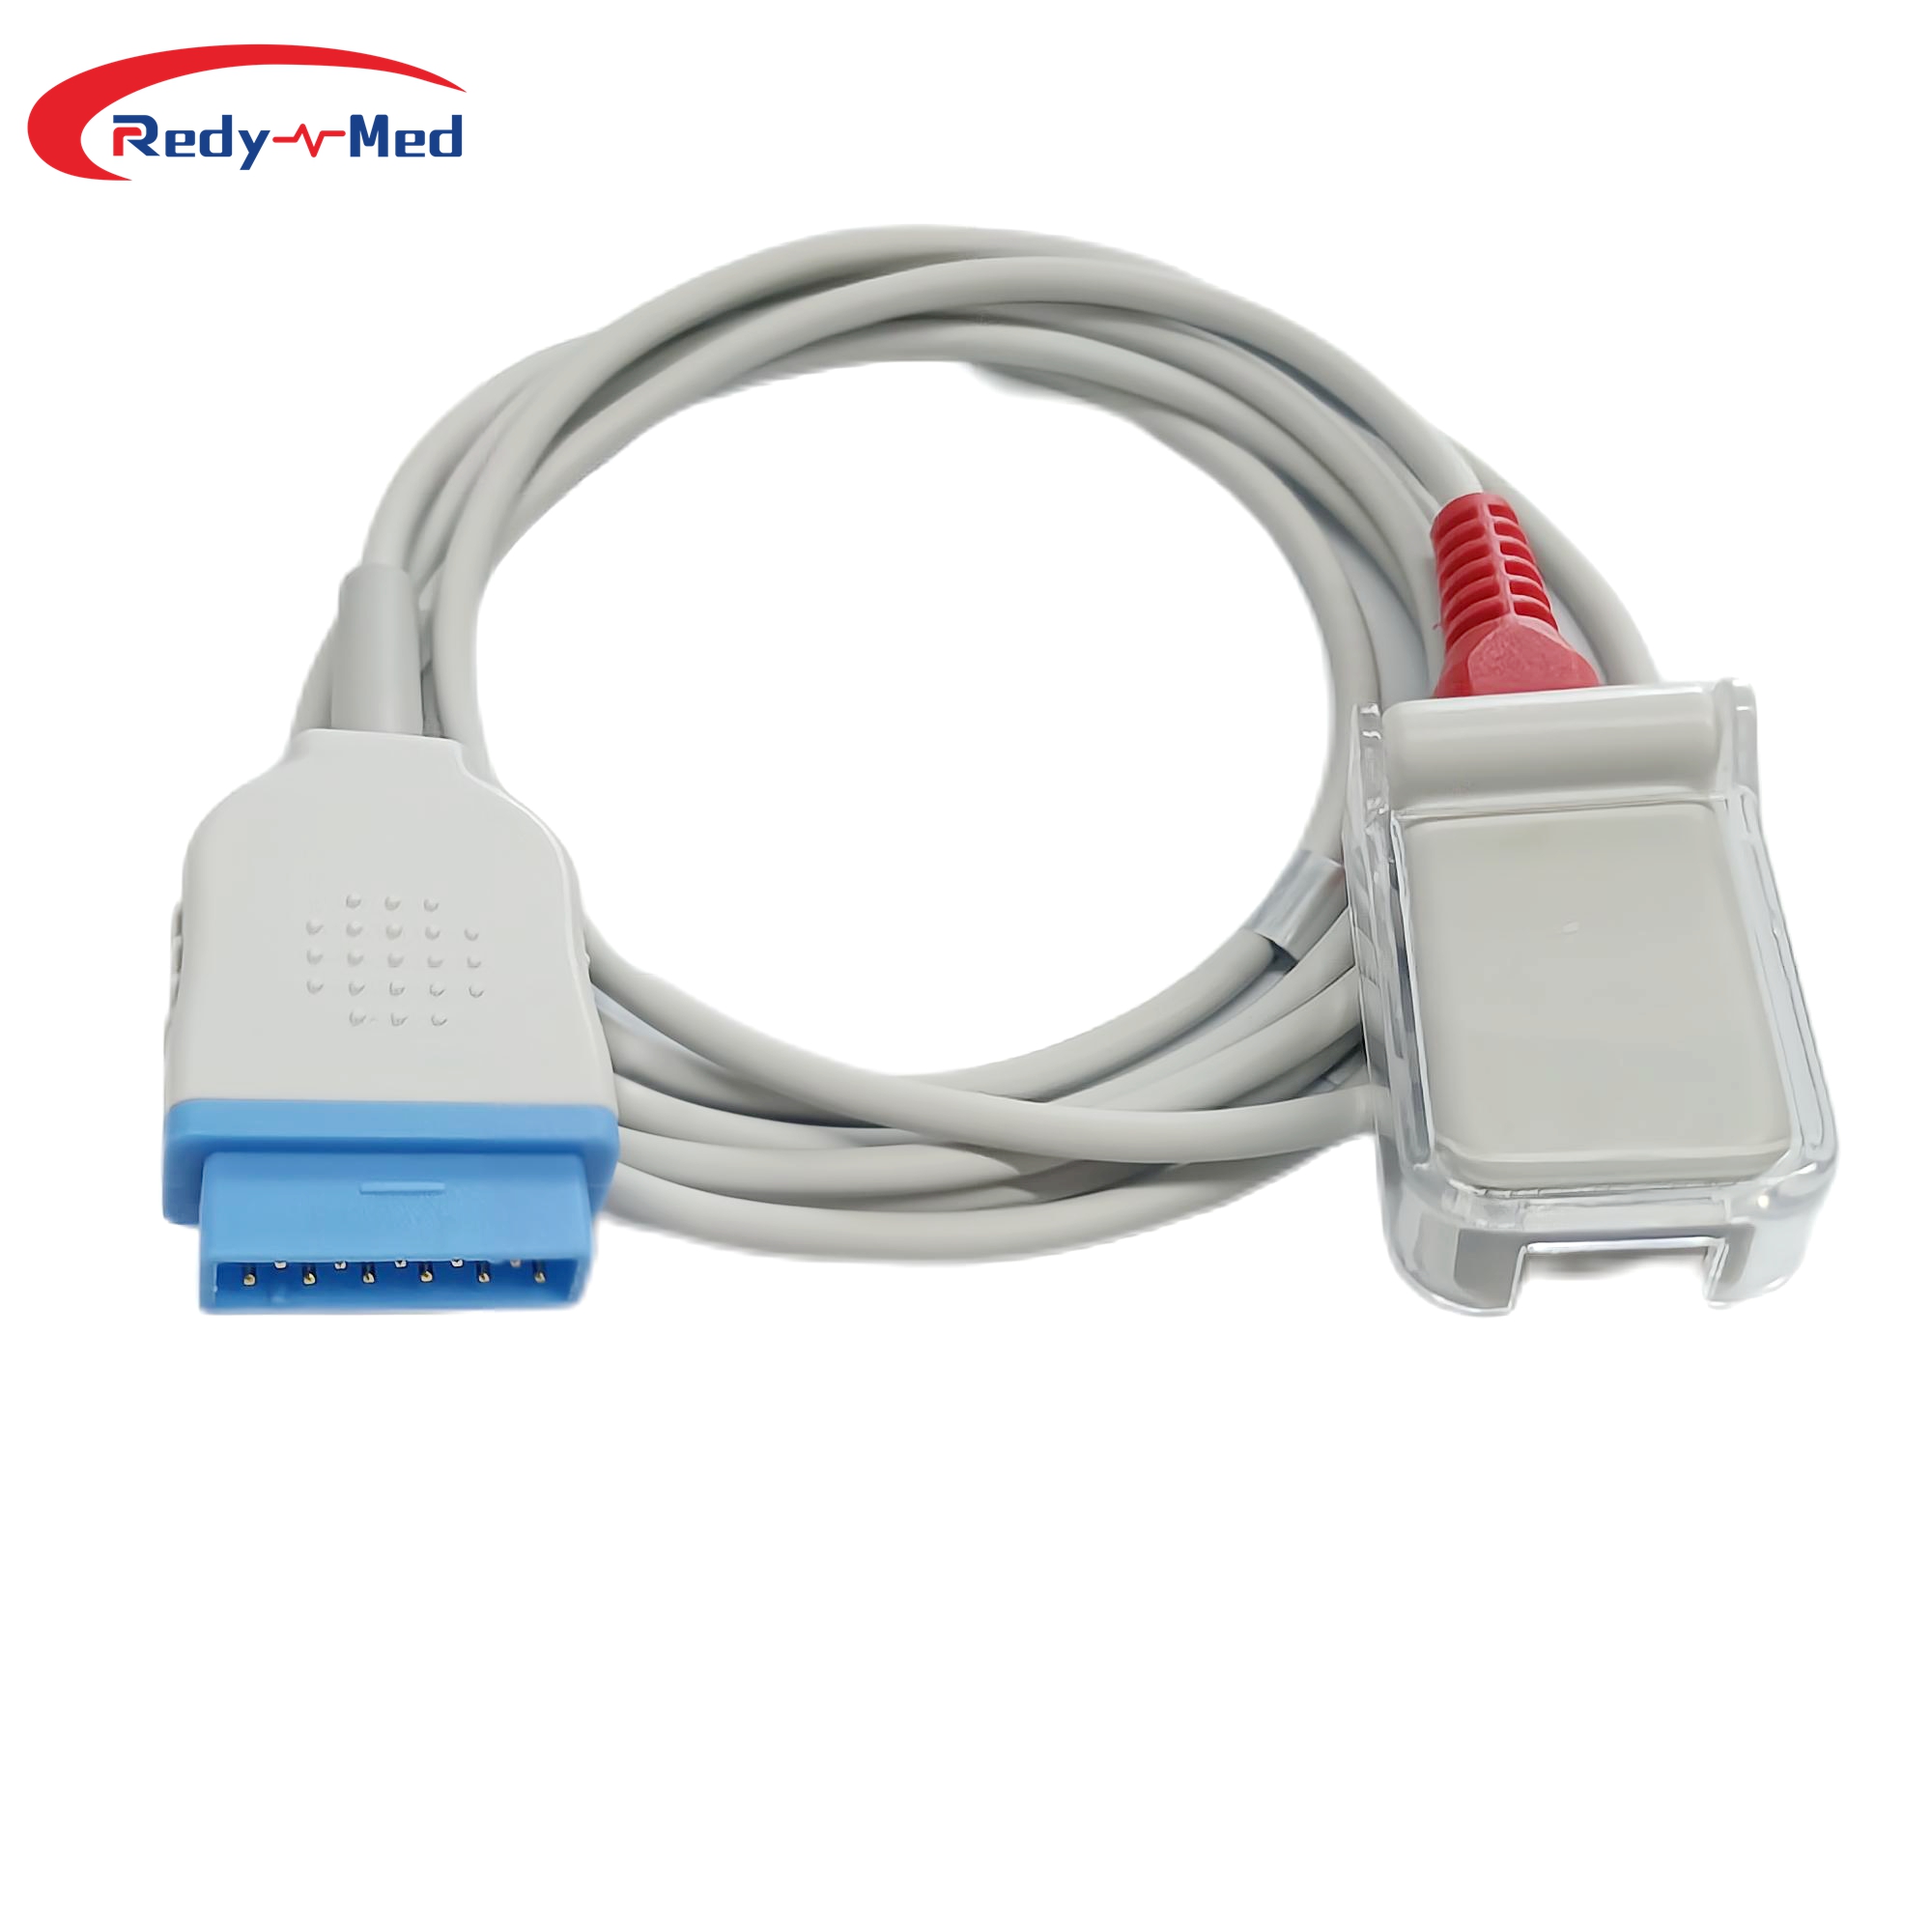 Compatible With GE/Bitmos/Mennen/Respironics/Zoll/ Physio Control Spo2 Adapter/Extension Cable (Masimo Tech)